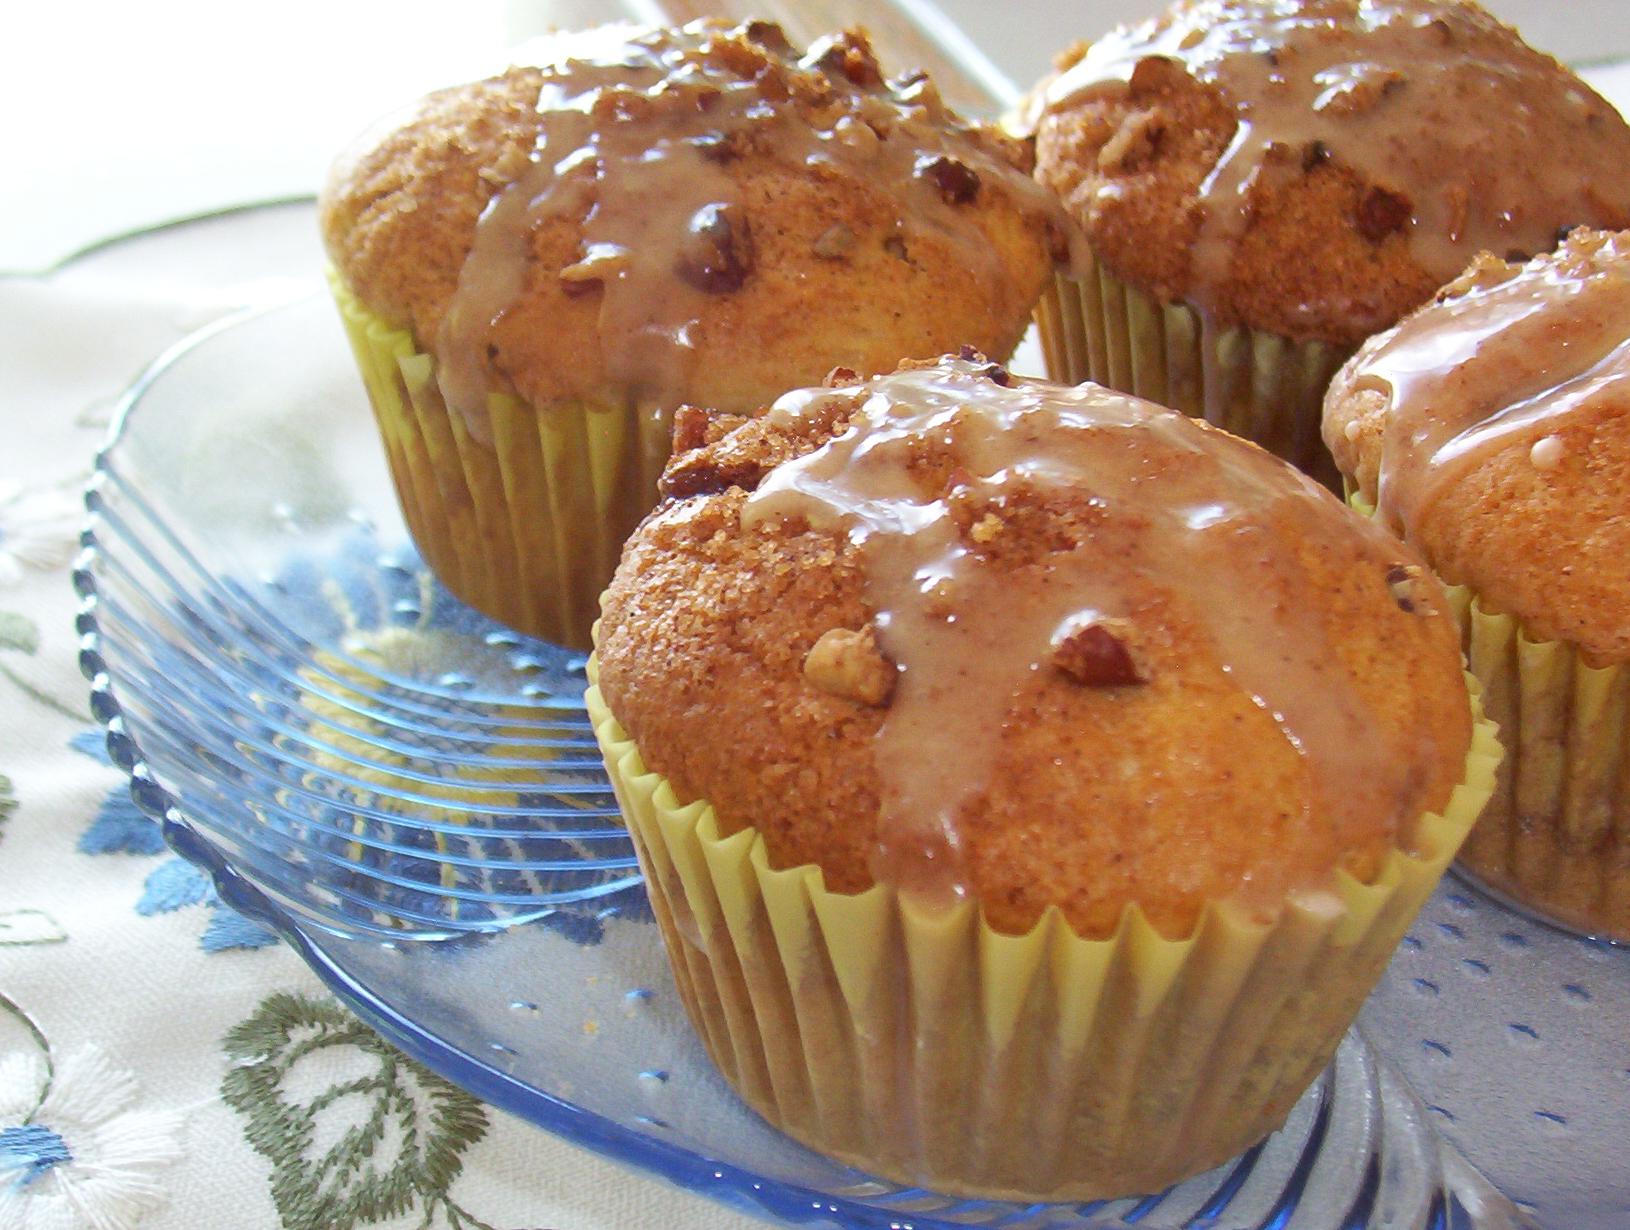  These muffins are like biting into a warm hug.